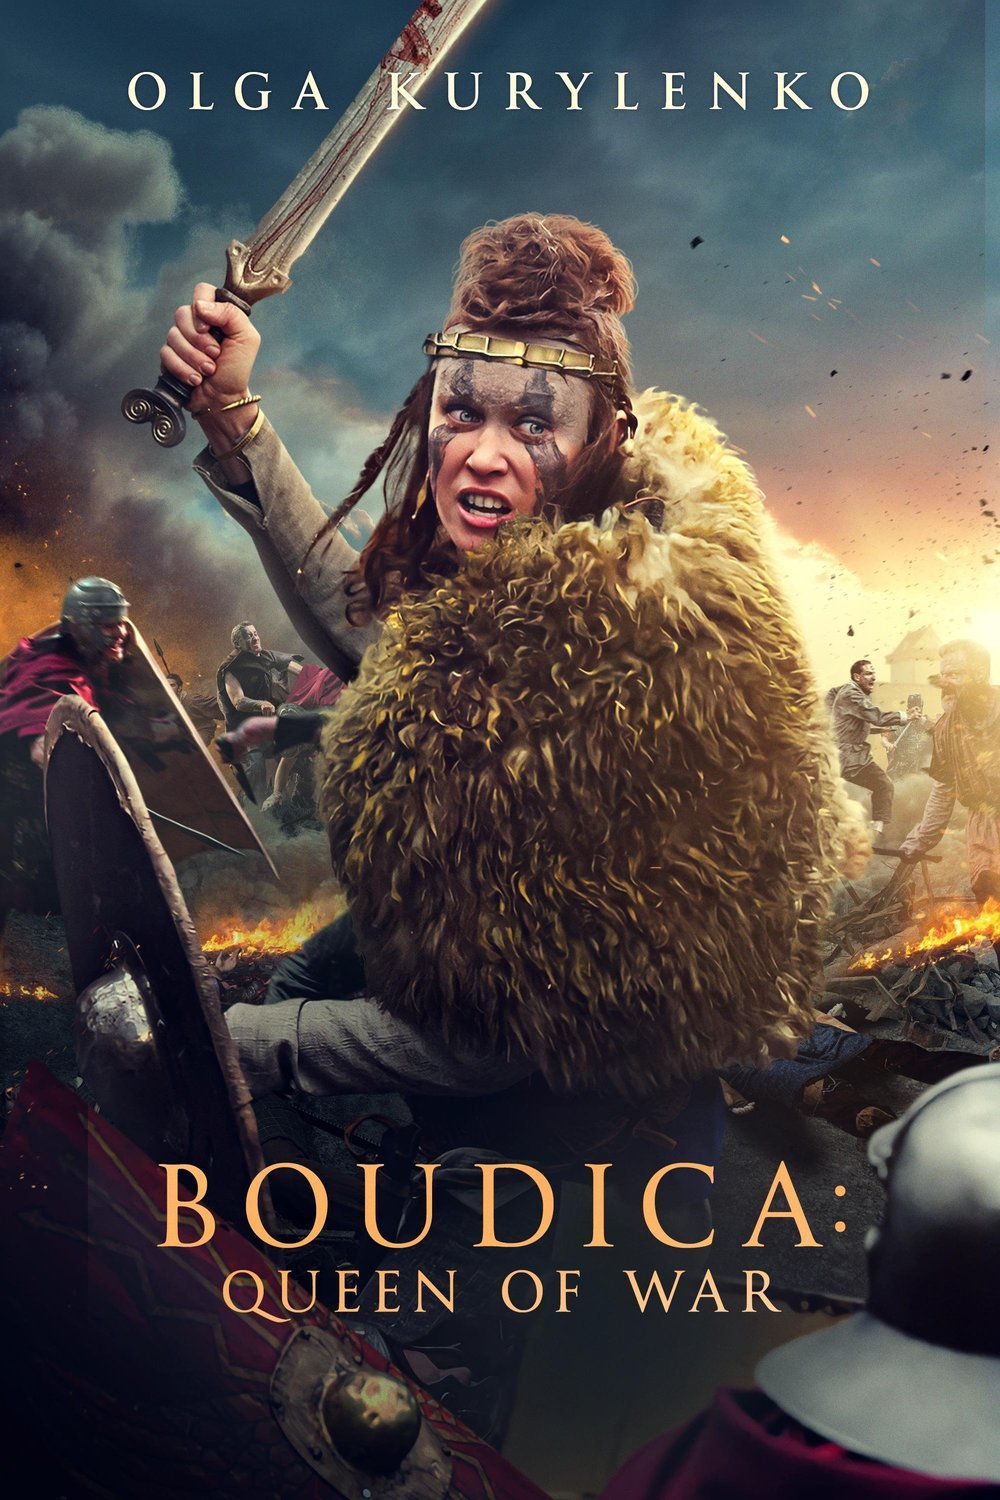 Poster of the movie Boudica